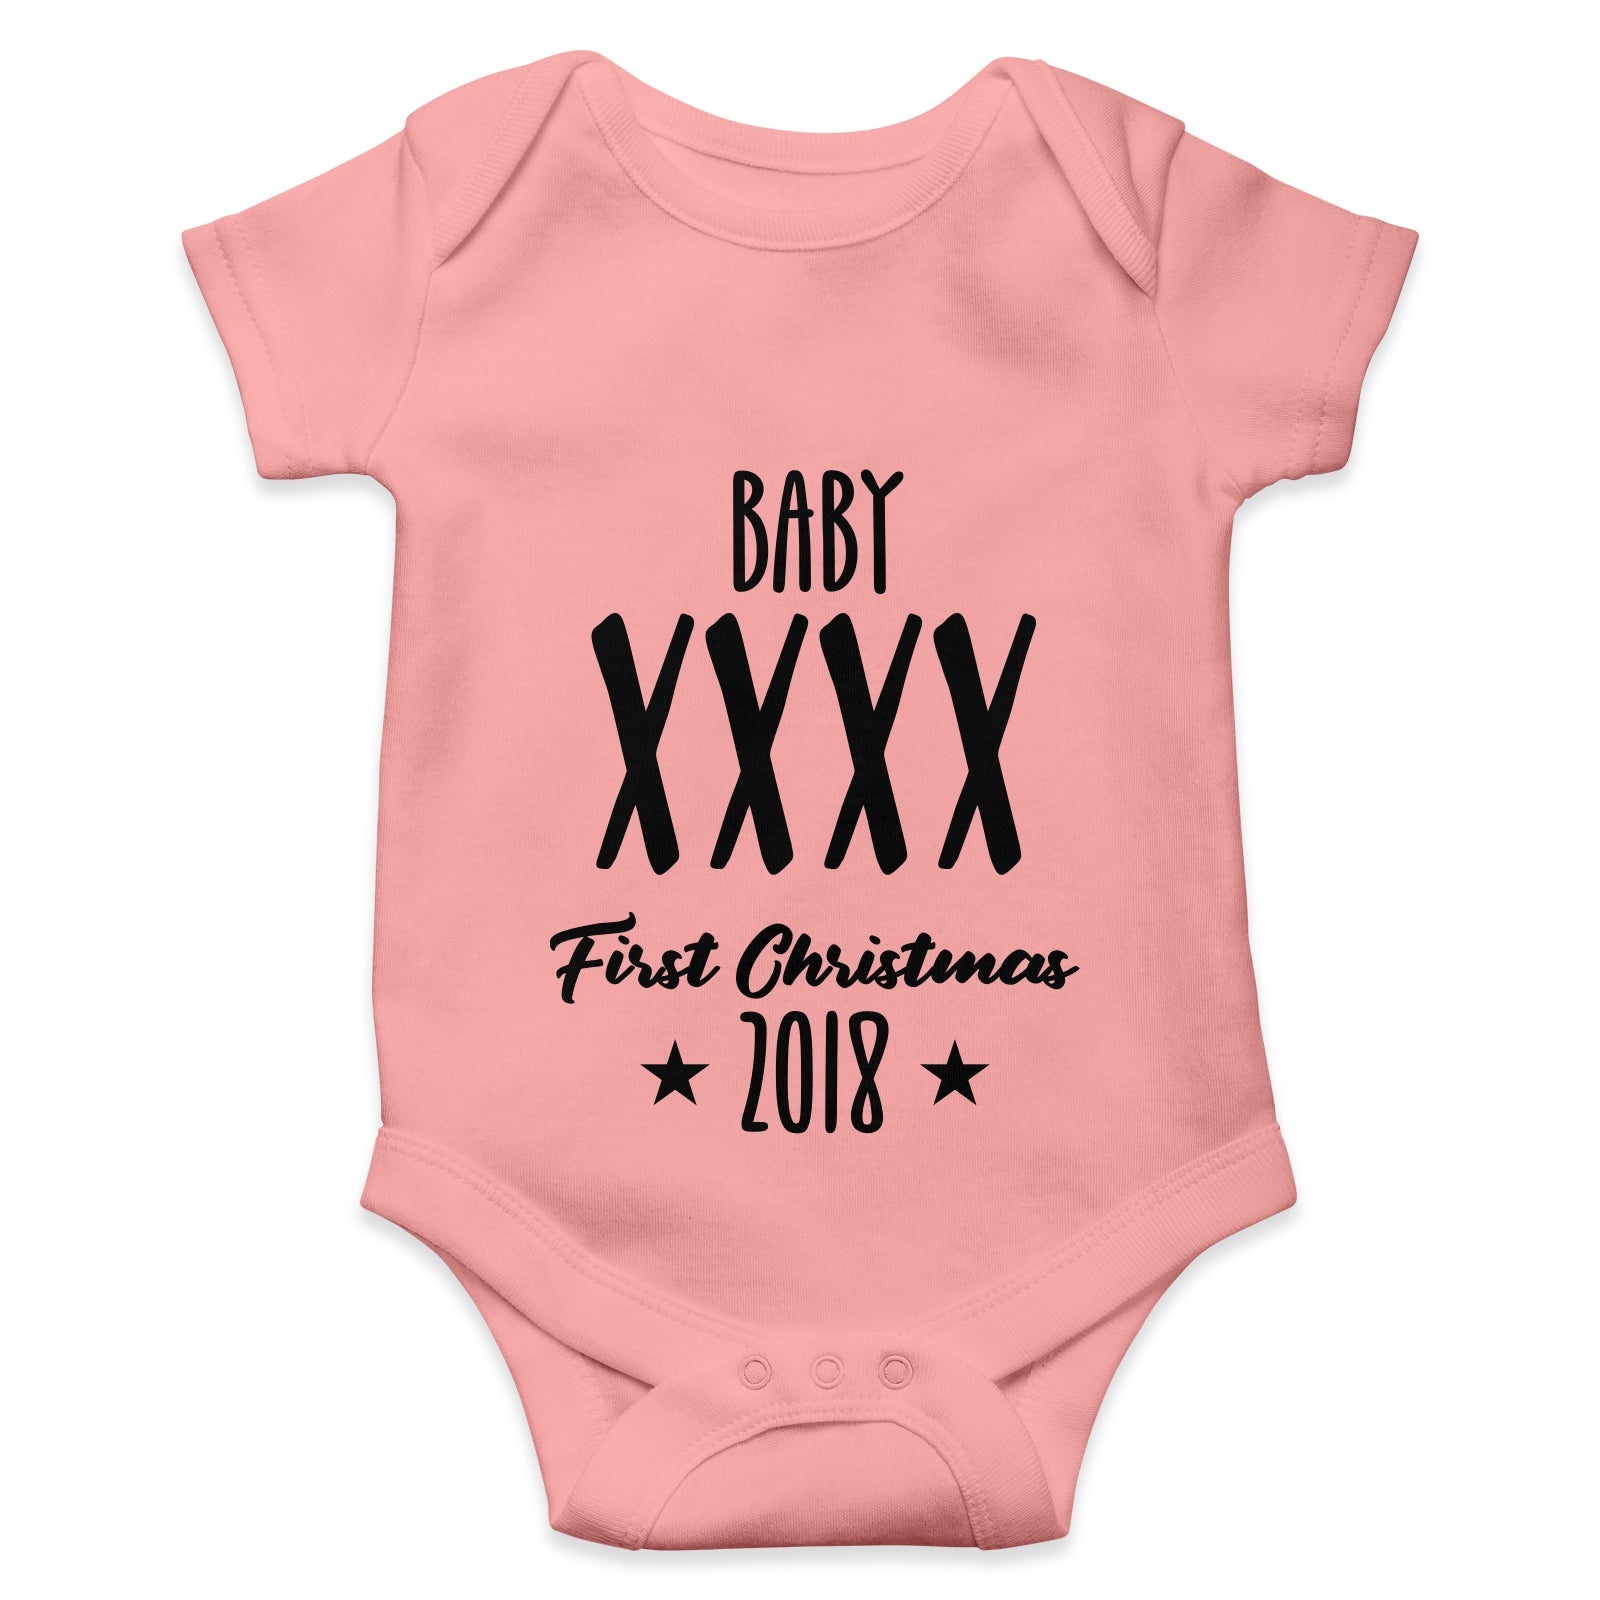 Personalised White Baby Body Suit Grow Vest - Christmas